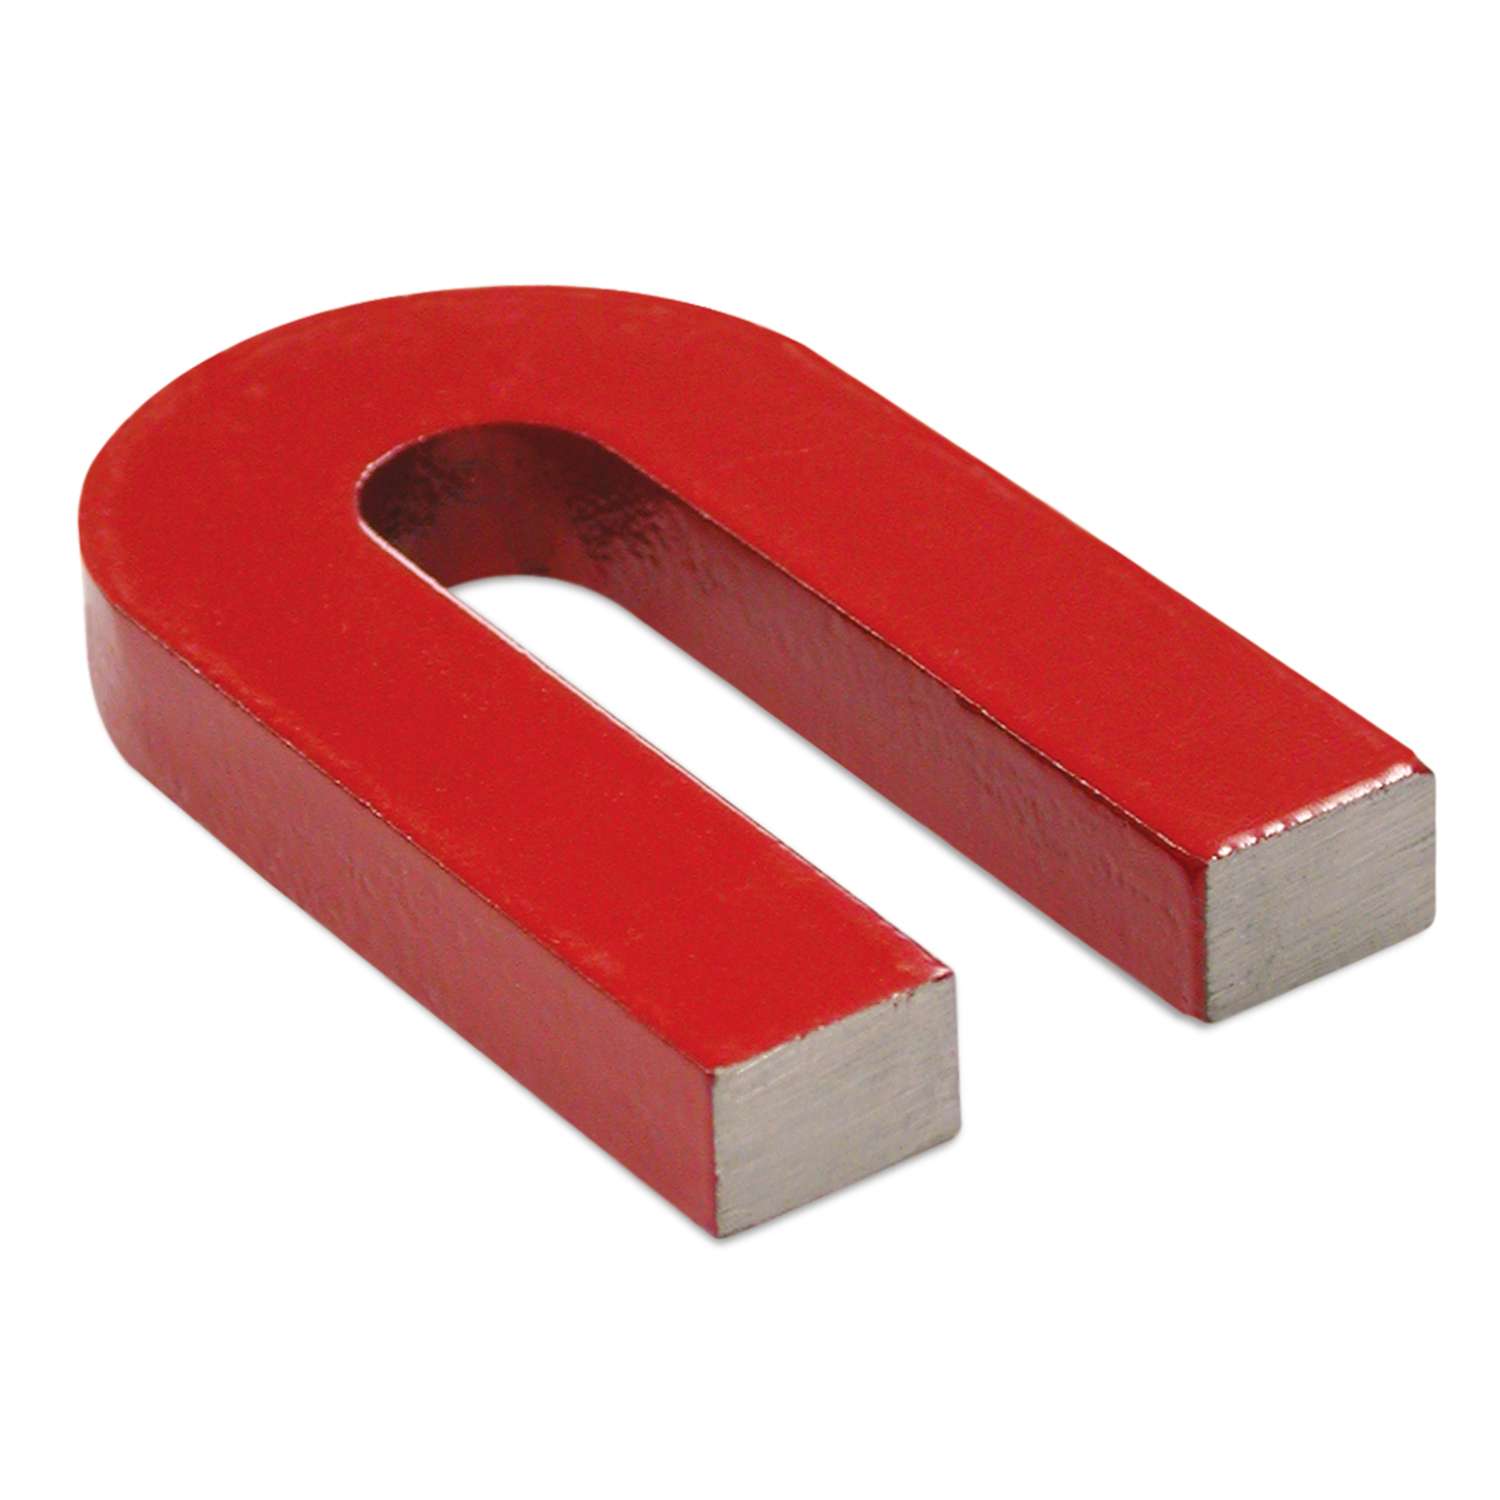 29 X 25 X8mm Traditional Alnico Horseshoe Magnet Keeper Educational Science Toy for sale online 